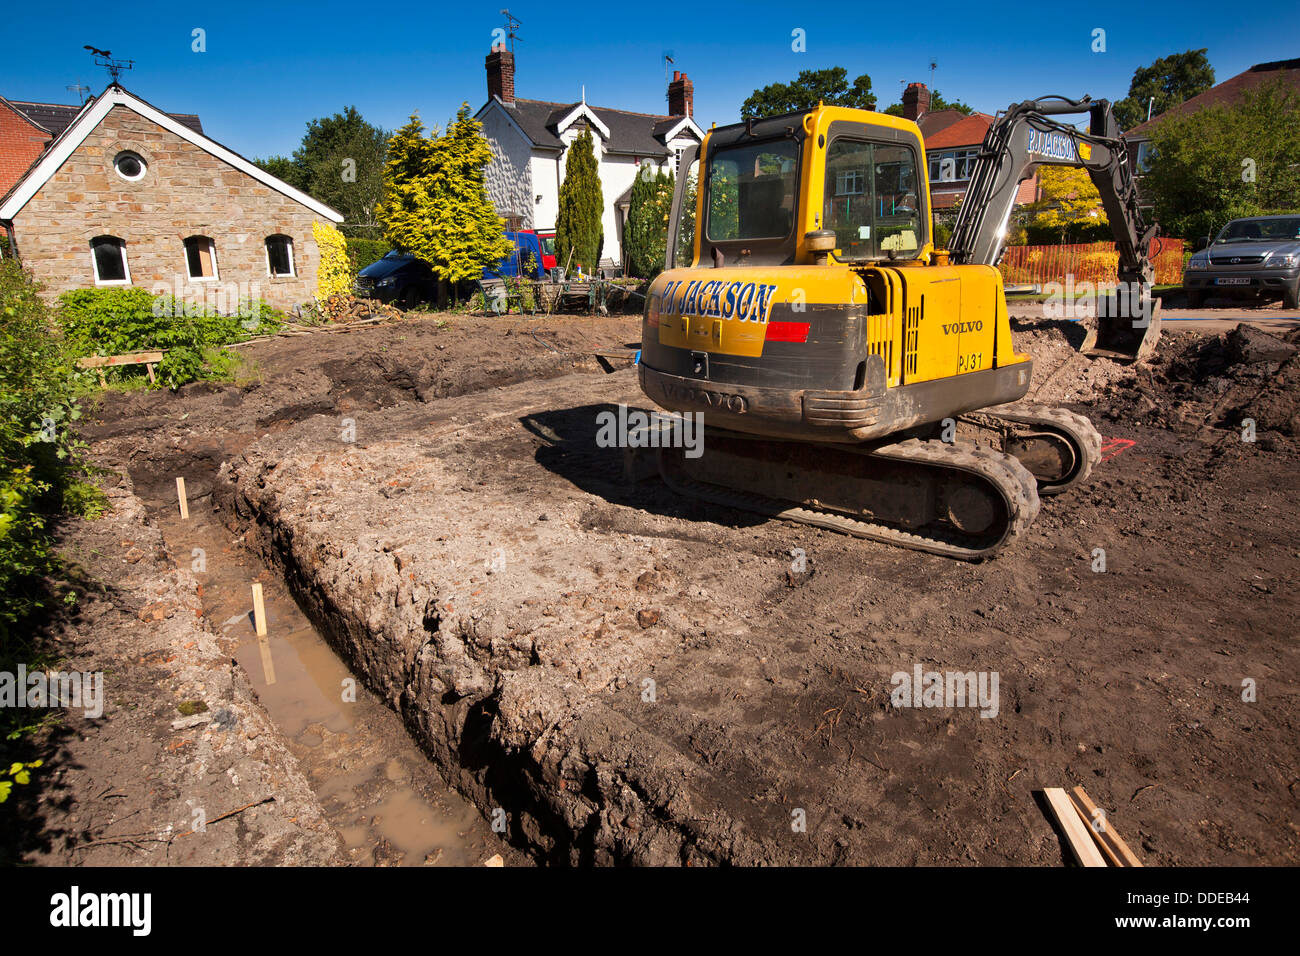 Al844 self building house, preparing site, volvo digger digging trench for foundations Stock Photo